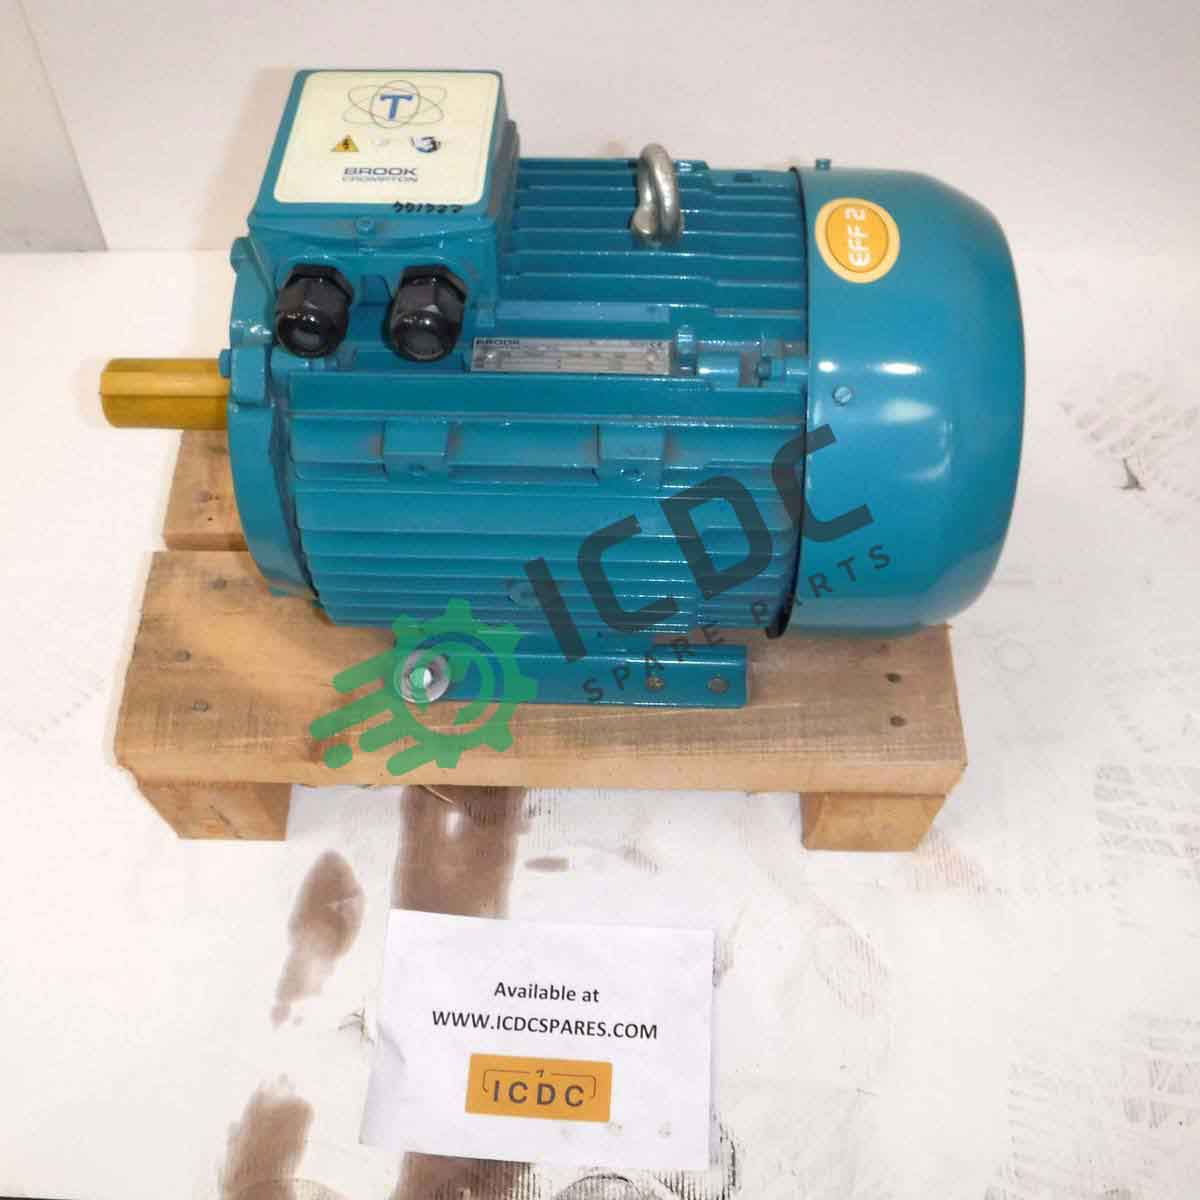 Brook Crompton Tda132m4 Electric Motor Available In Icdc